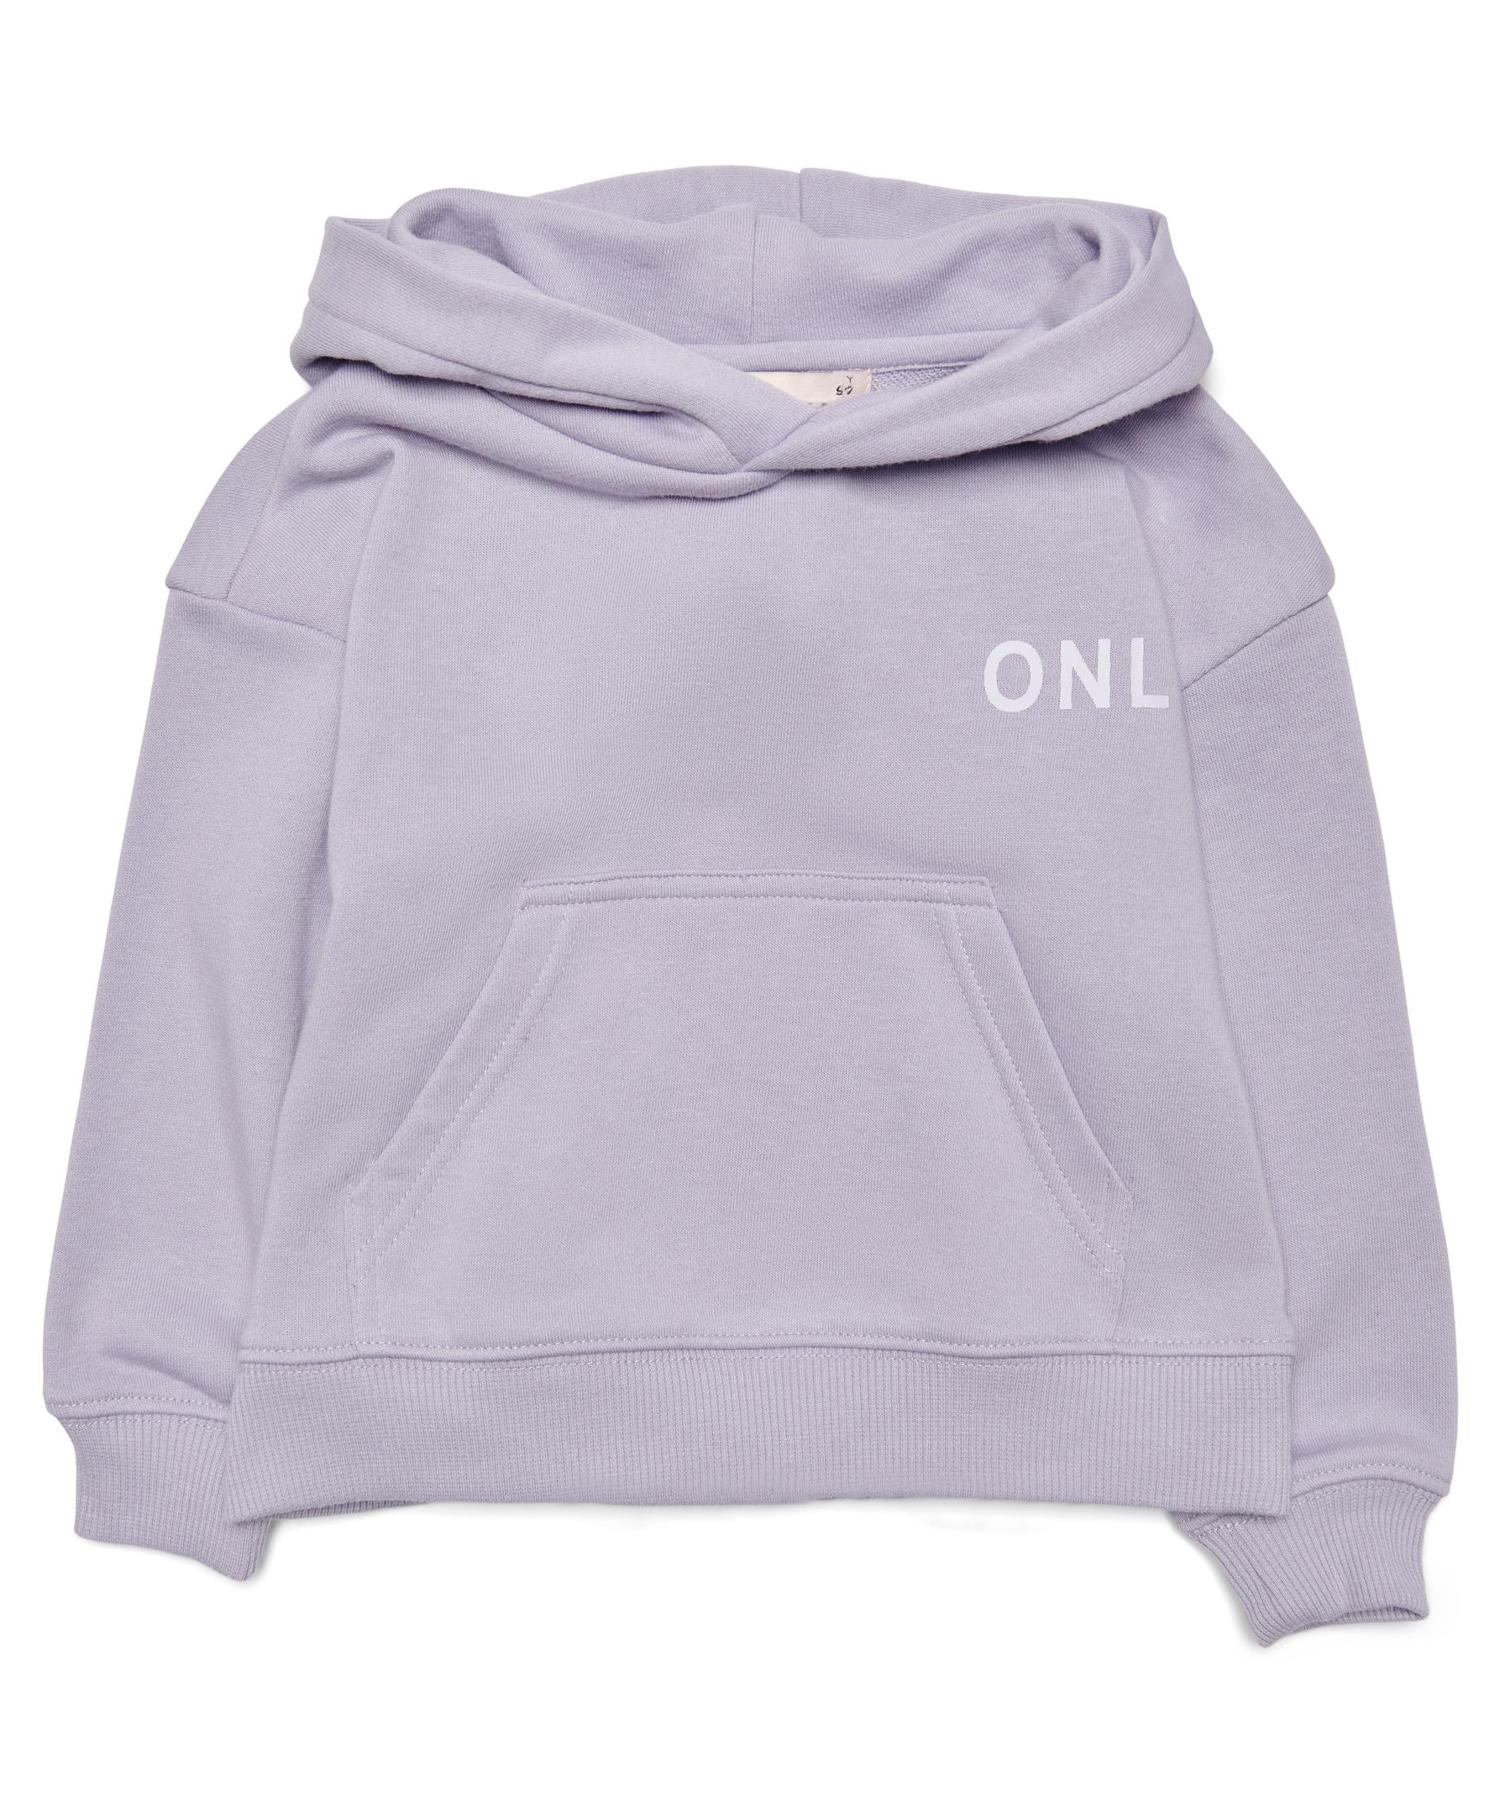 Only Kids never small logo hoodie